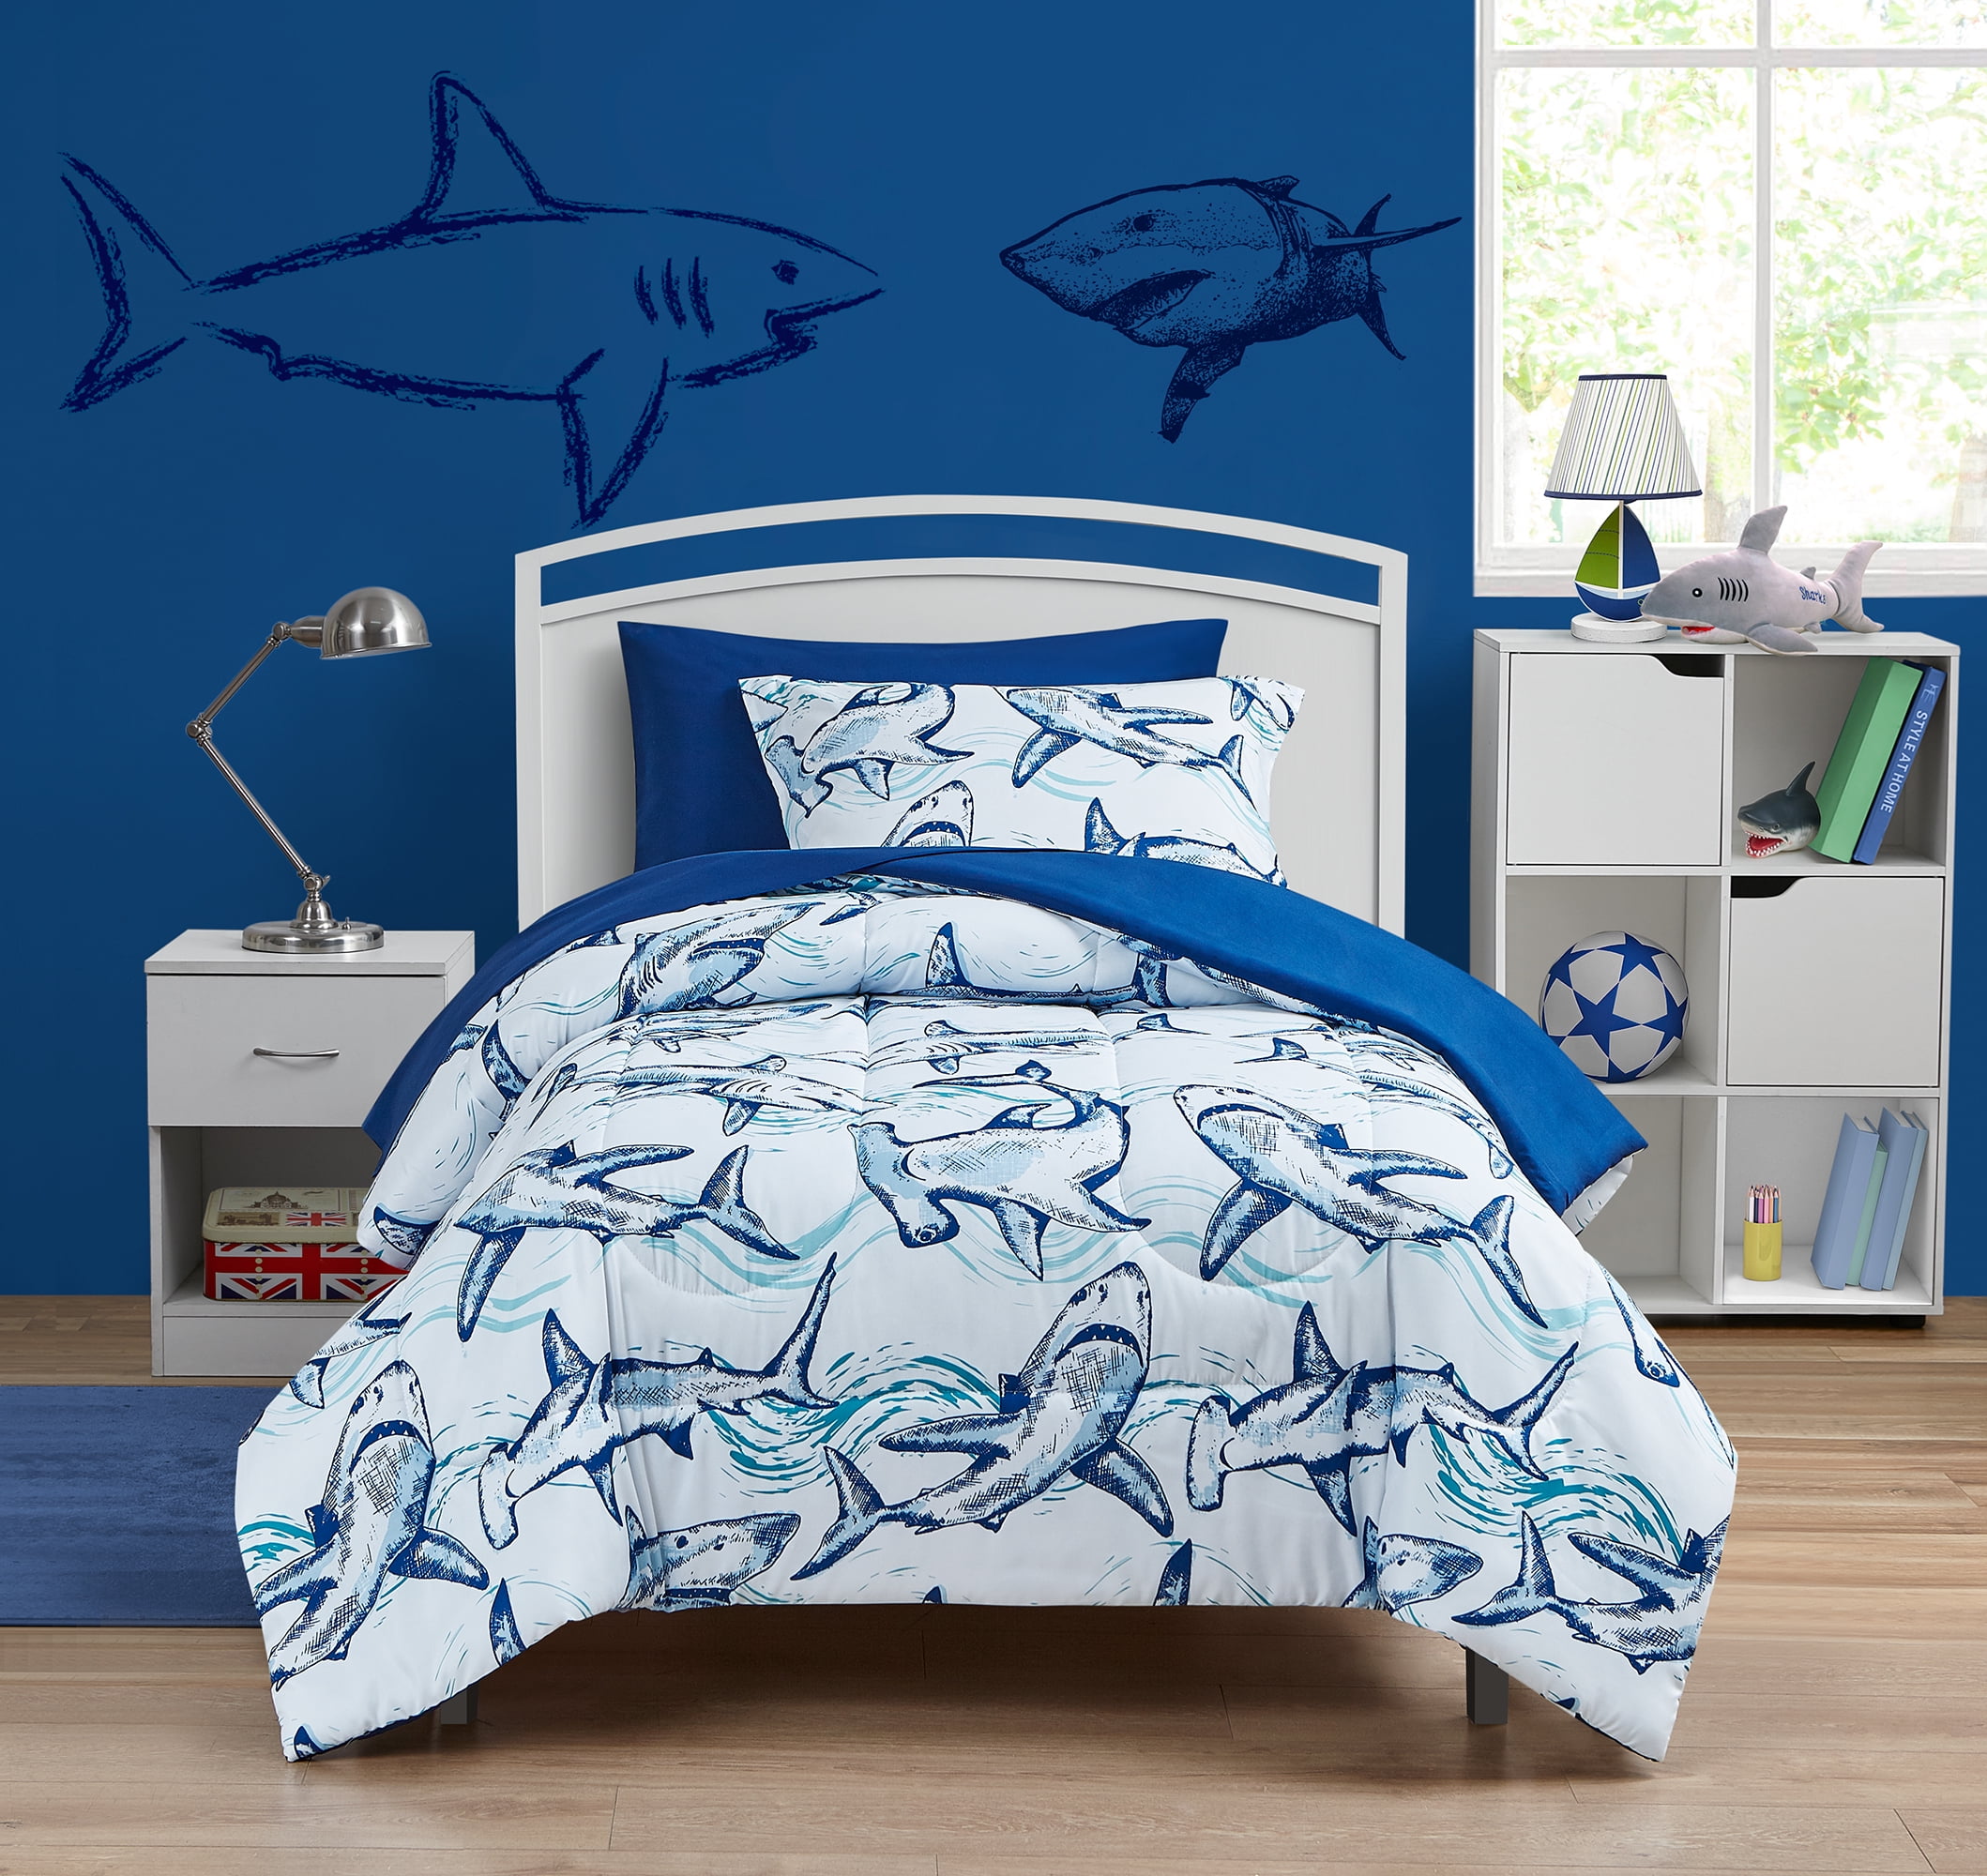 Your Zone Shark Bed in a Bag Bedding Set Full or Twin Blue 